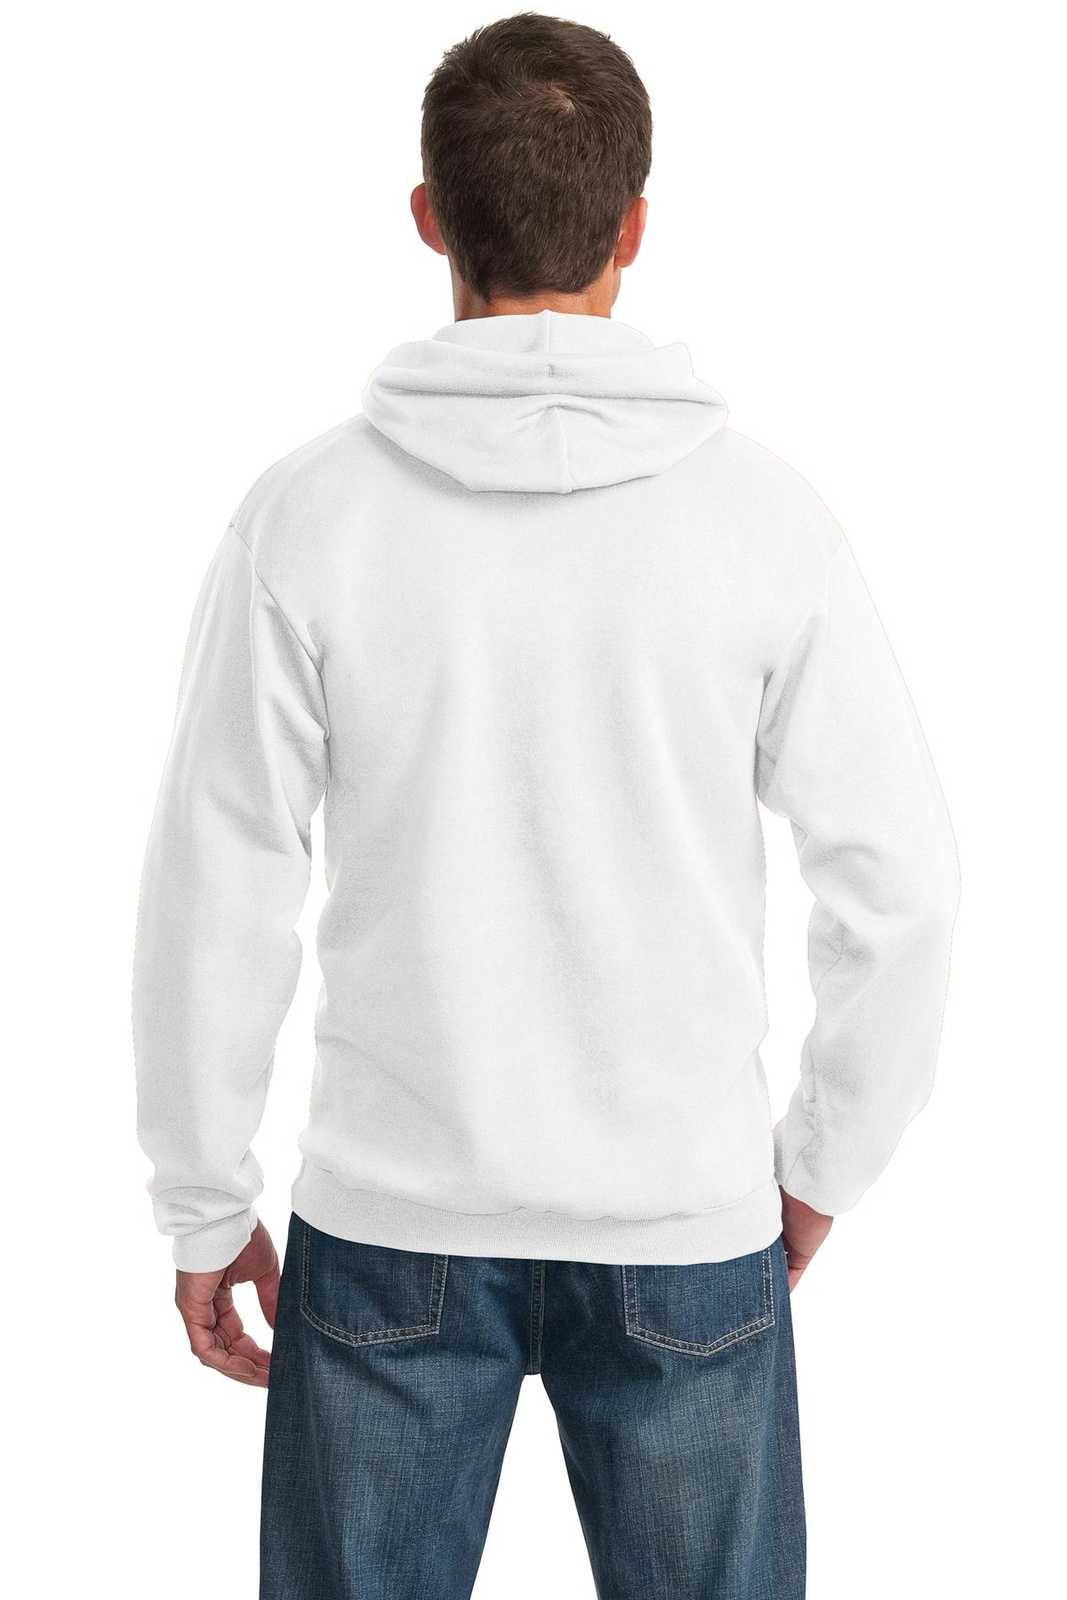 Port & Company PC90H Essential Fleece Pullover Hooded Sweatshirt - White - HIT a Double - 1